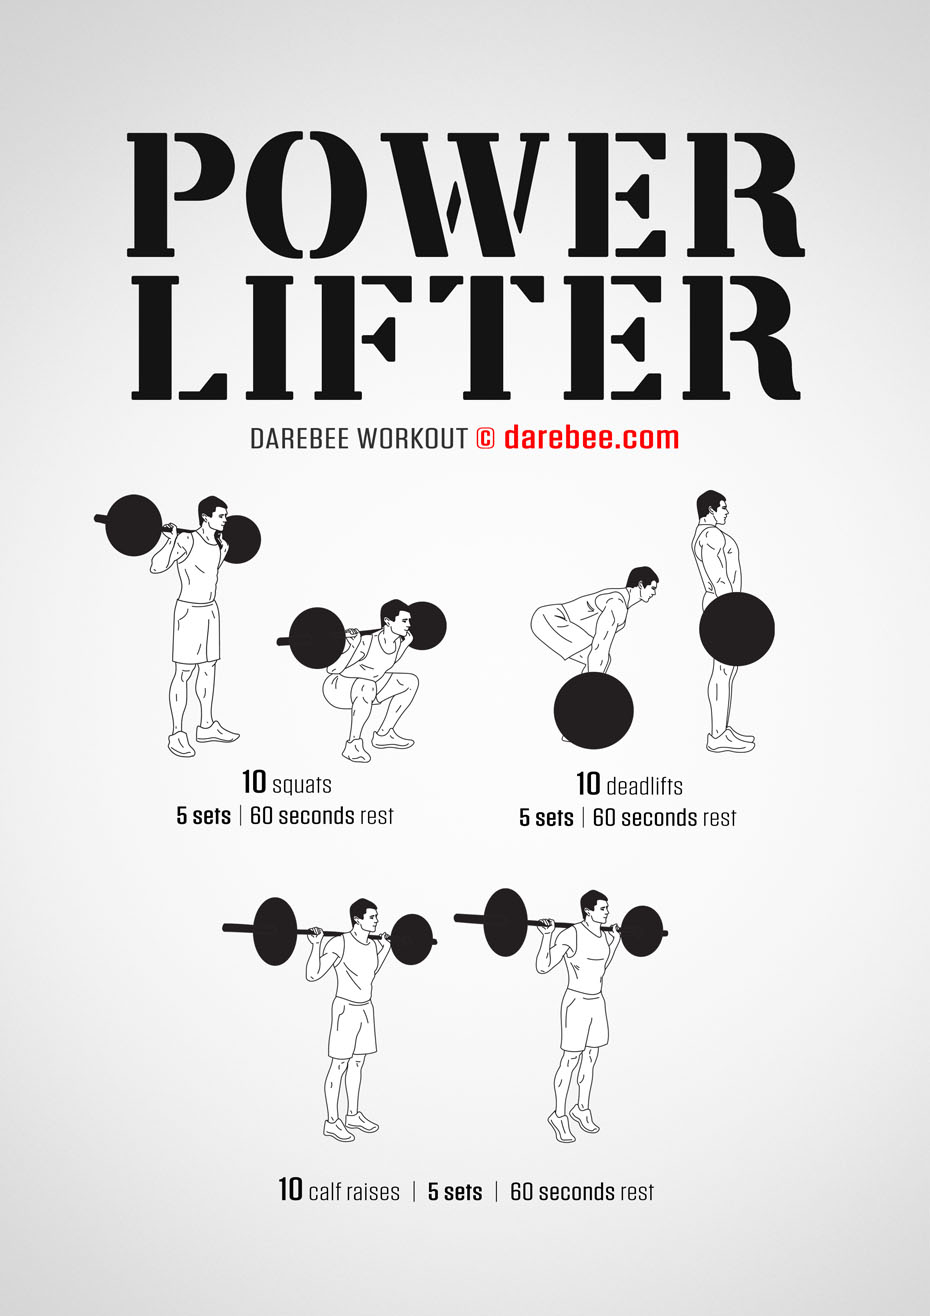 Powerlifter is a DAREBEE home fitness, strength workout that uses extra weight to trigger the body's adaptation response to help you increase your strength.